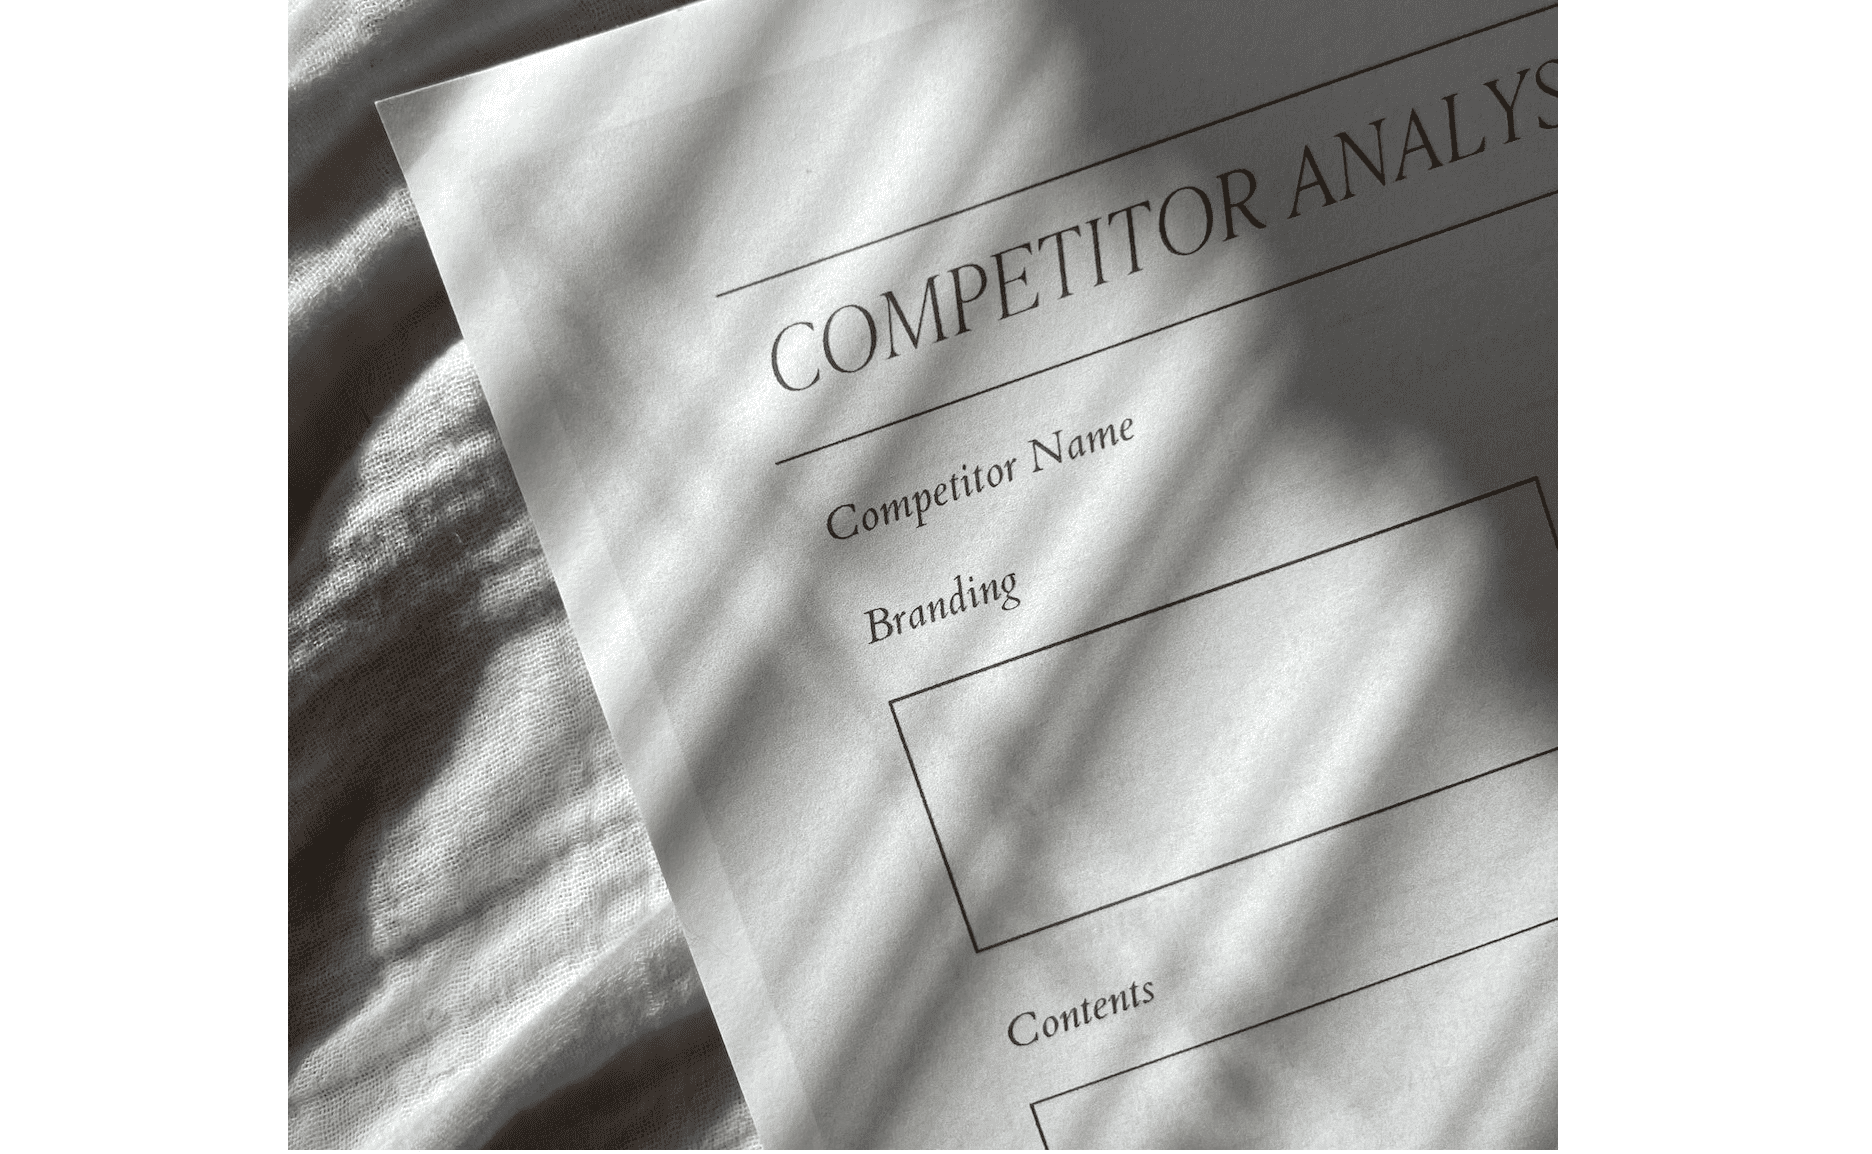 Competitor Analysis paper on top of the bed